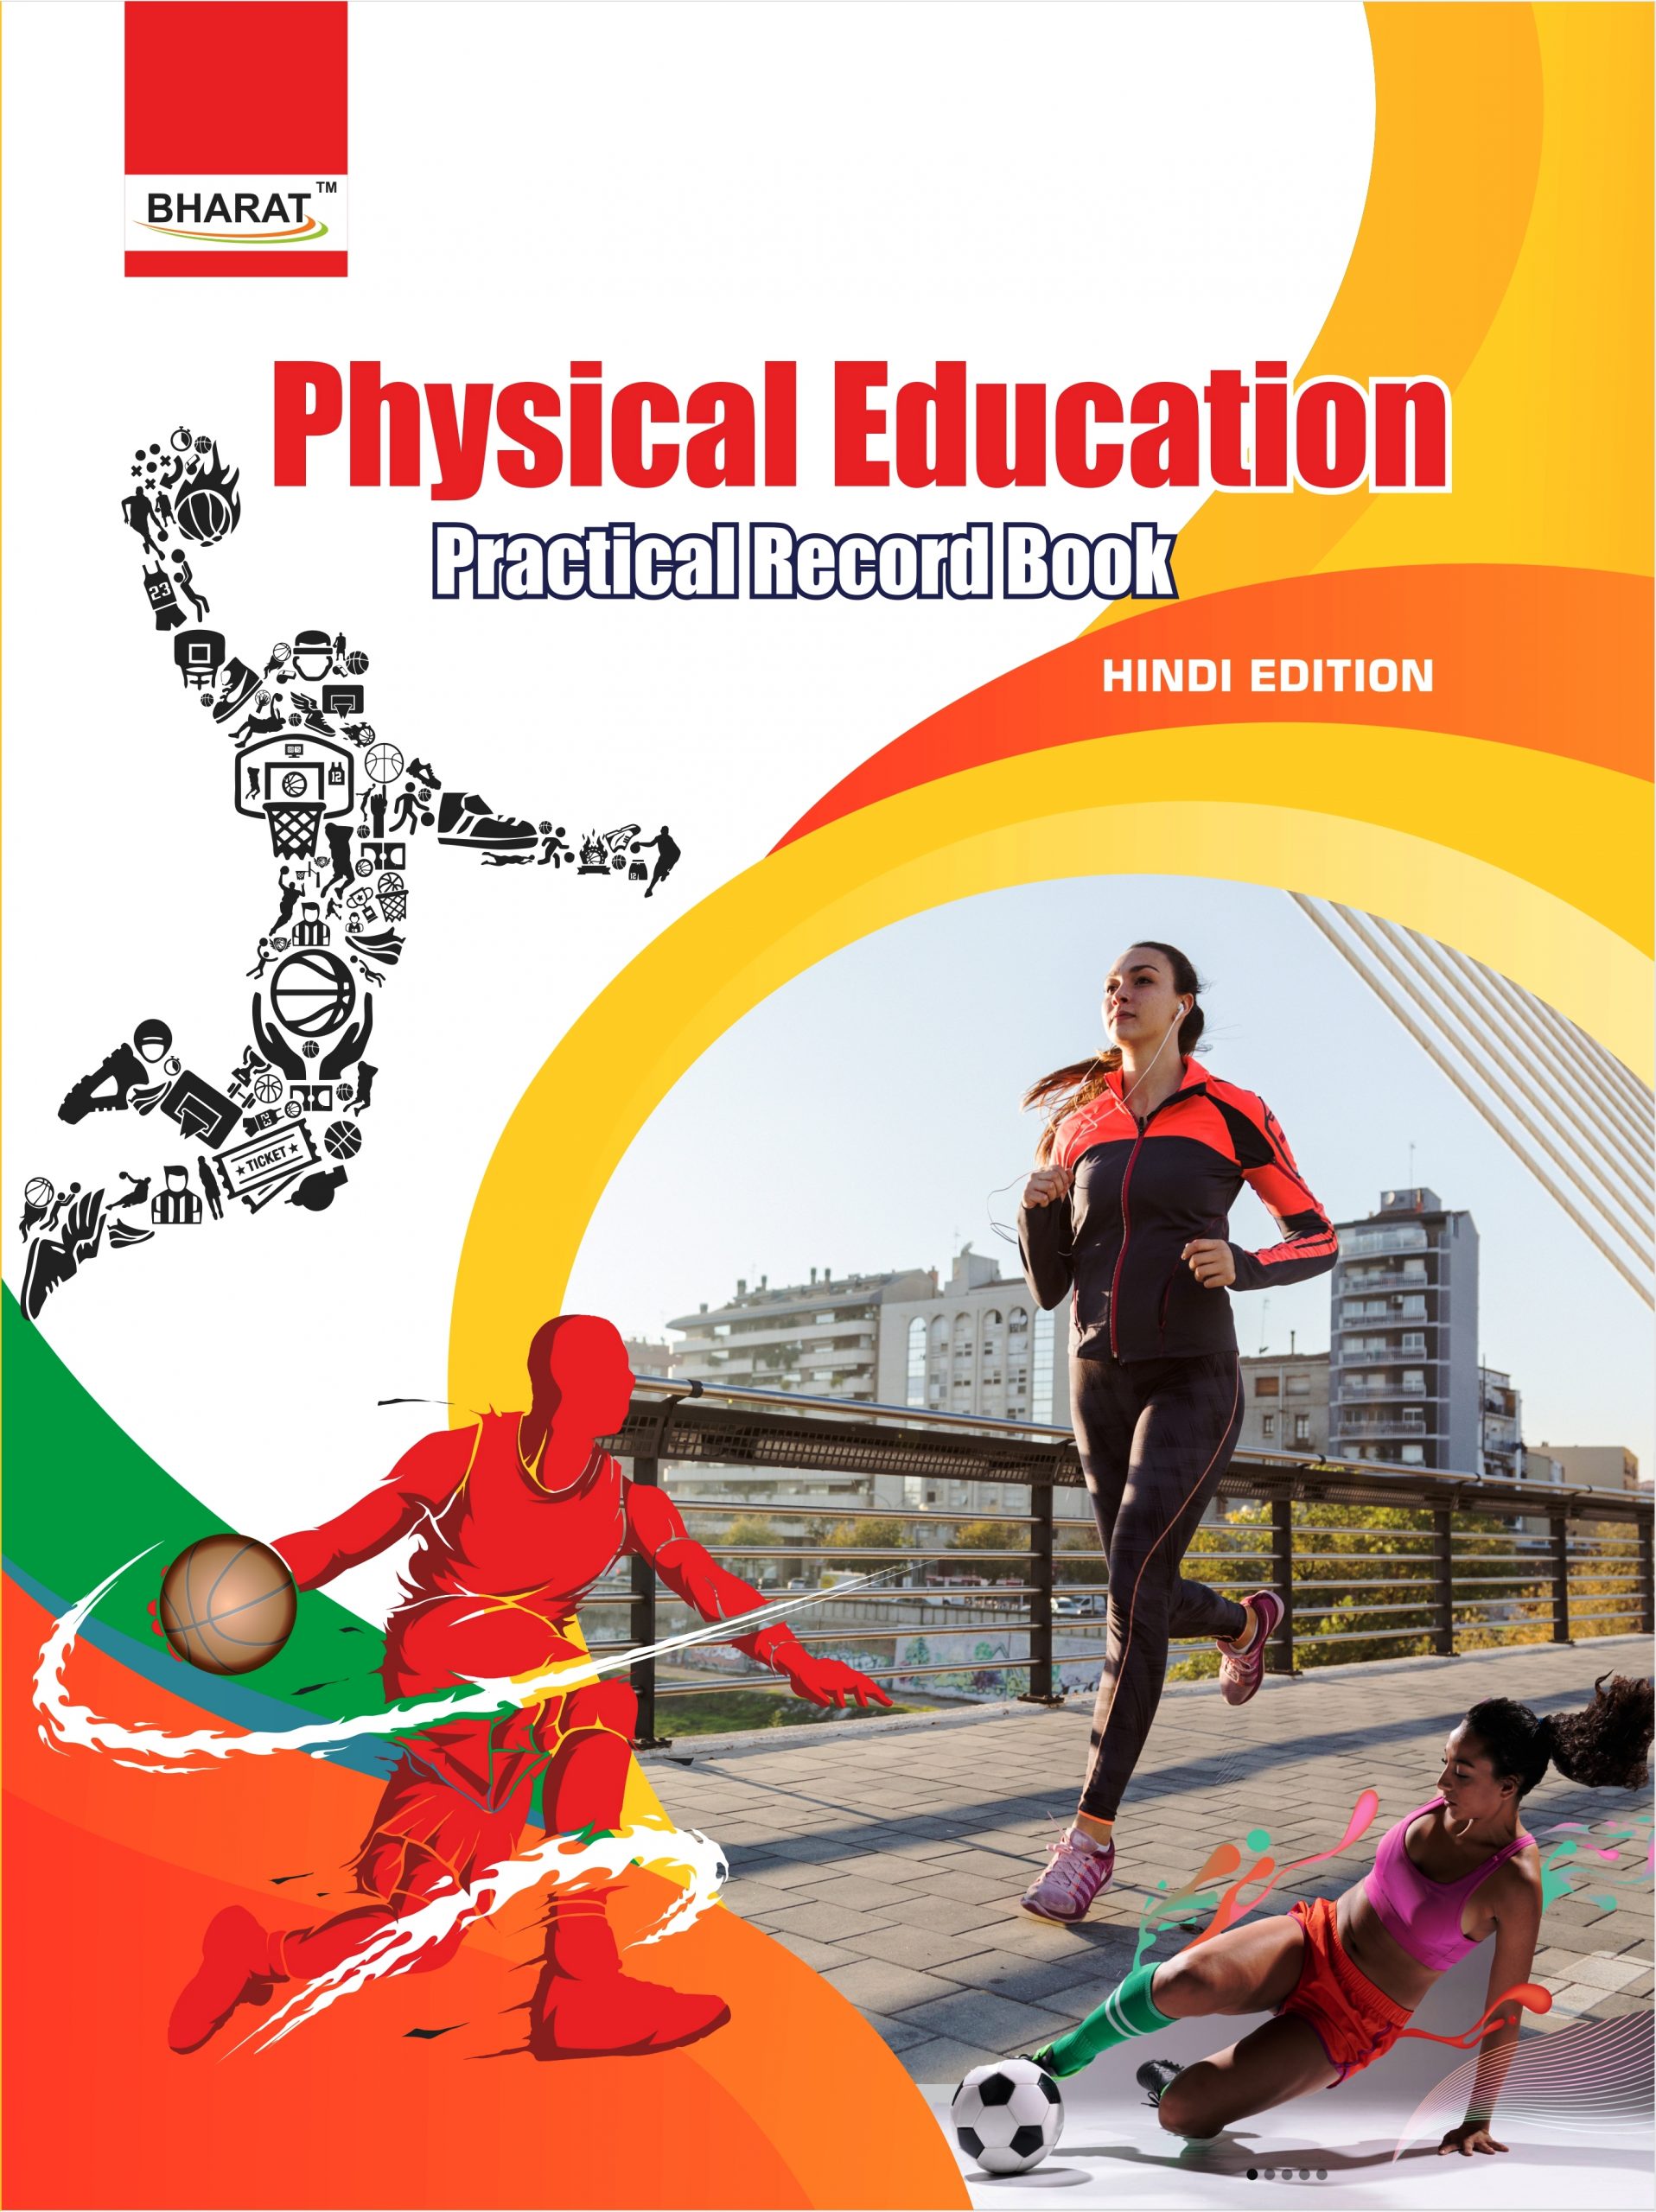 Physical education Practical Record Book (Hindi Edition) For all Under Graduate Classes